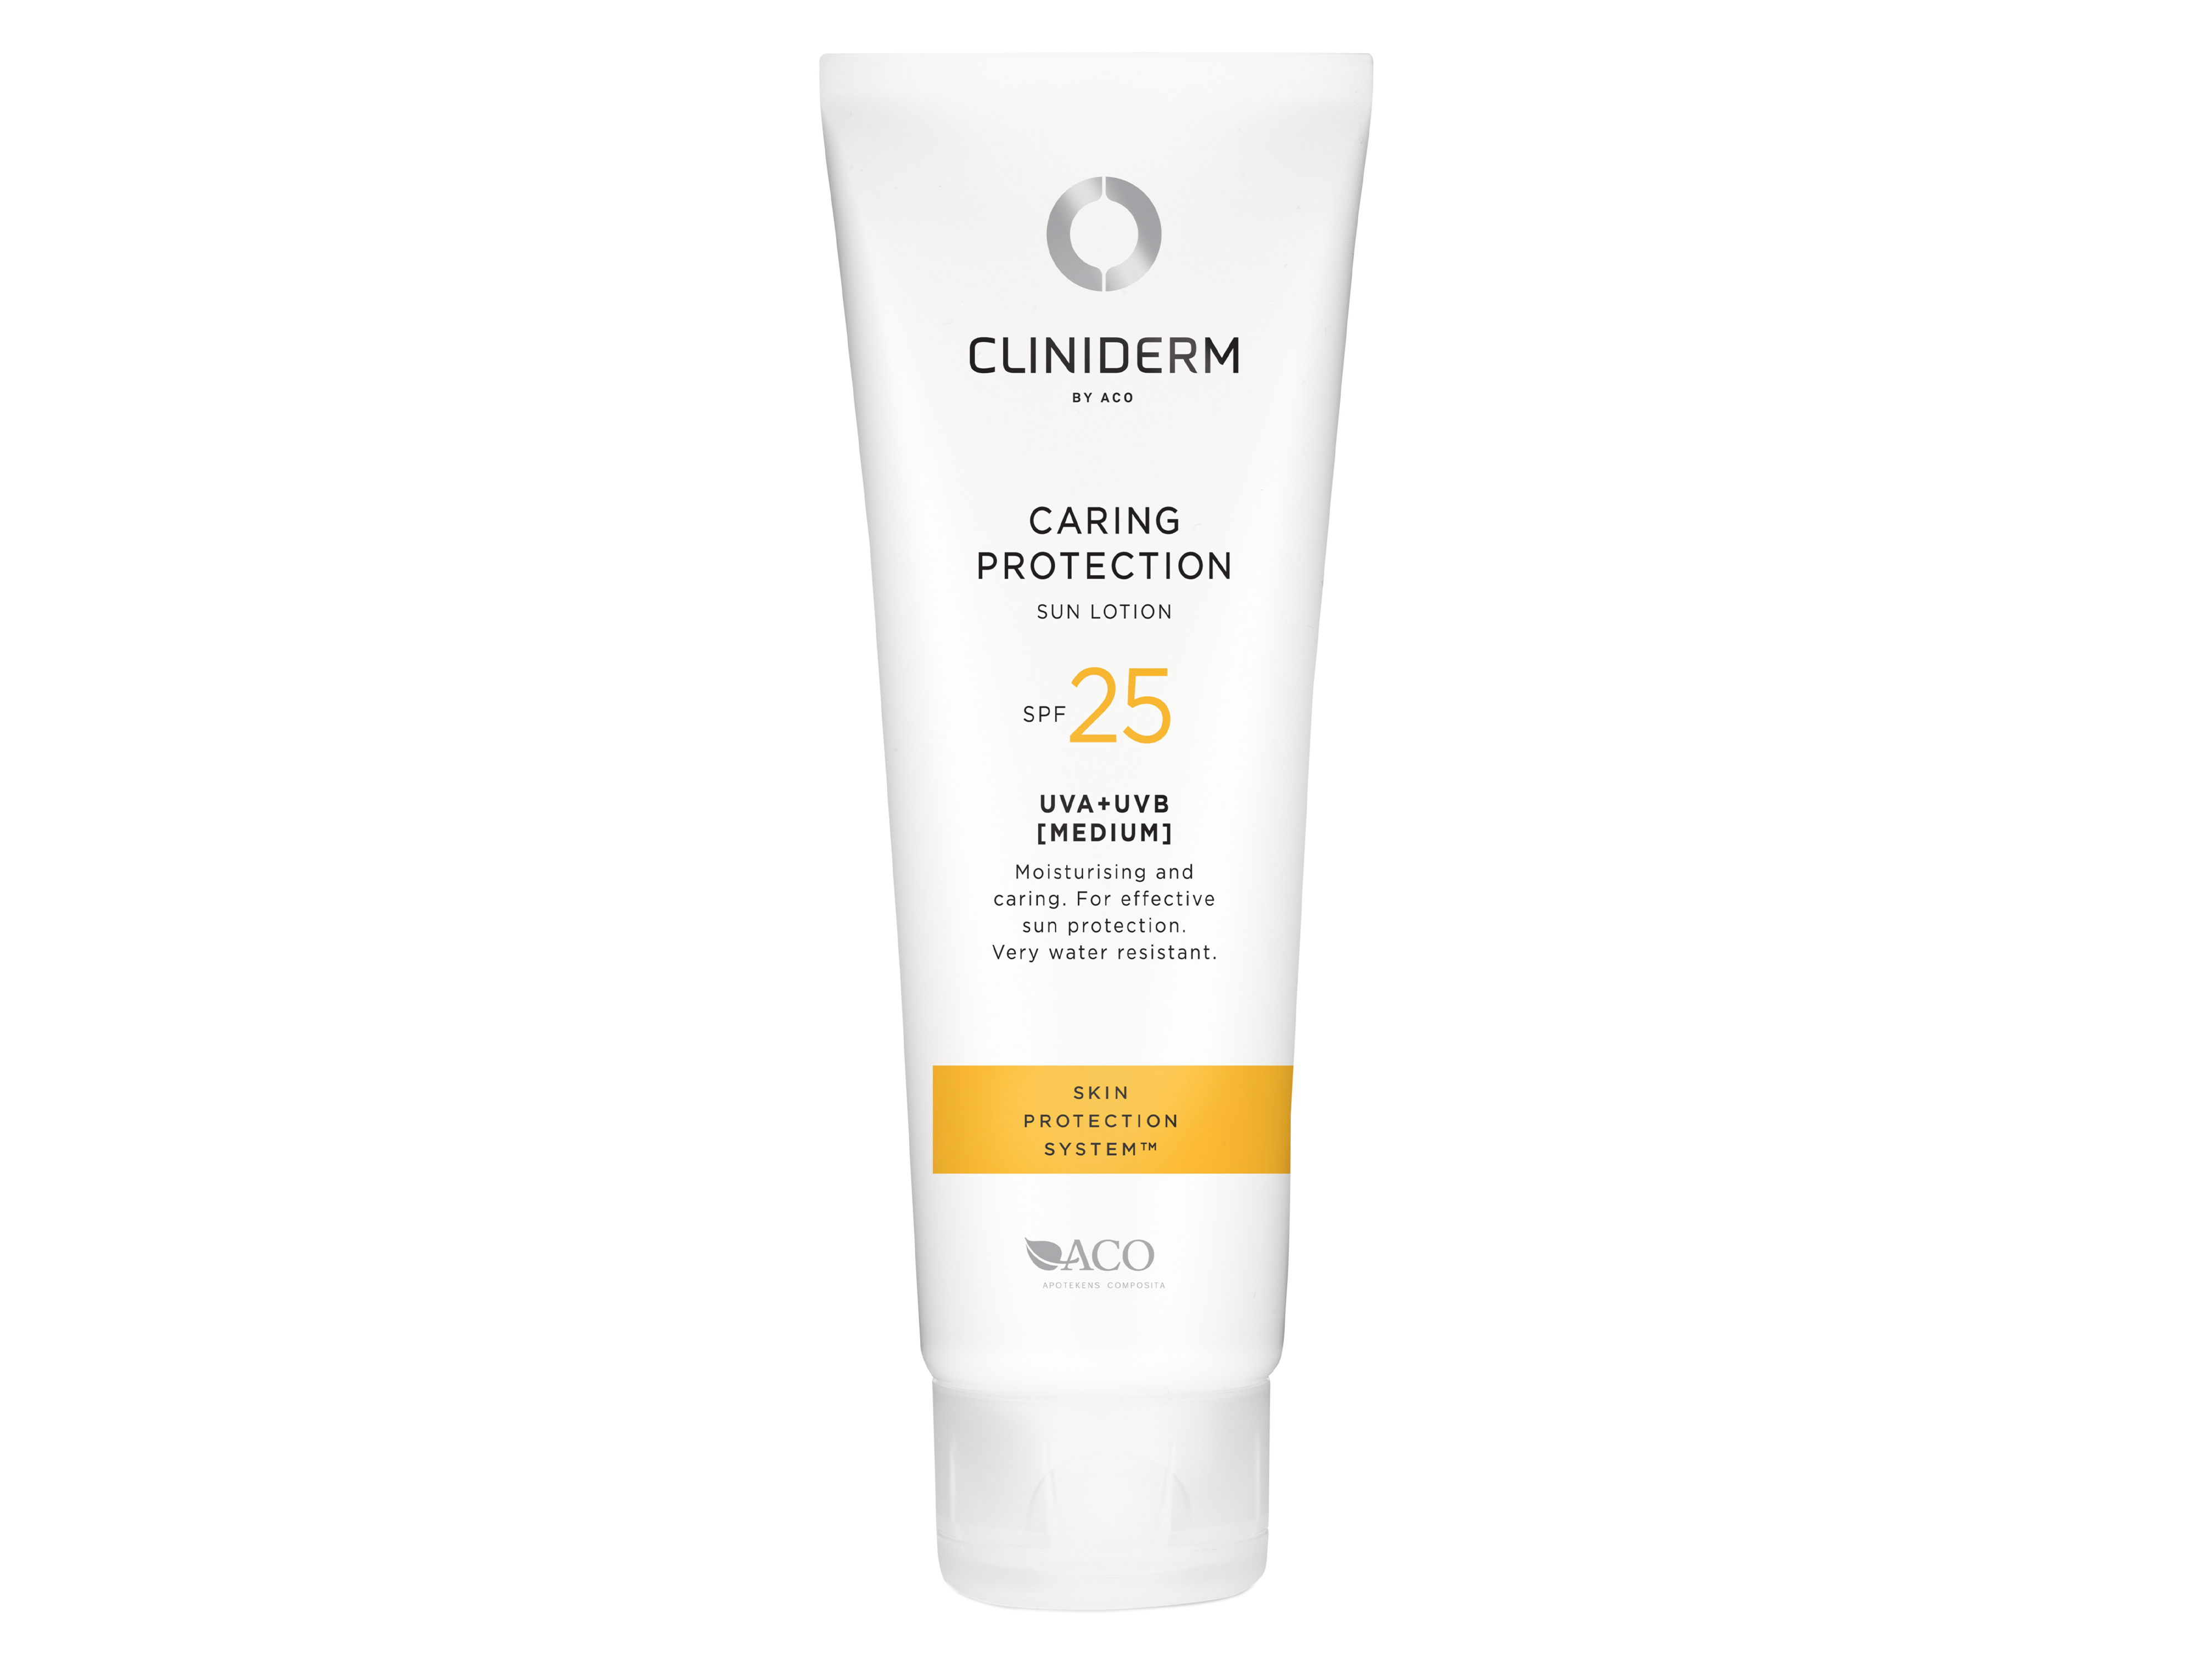 Cliniderm Caring Protection Sun Lotion, SPF 25, 125 ml